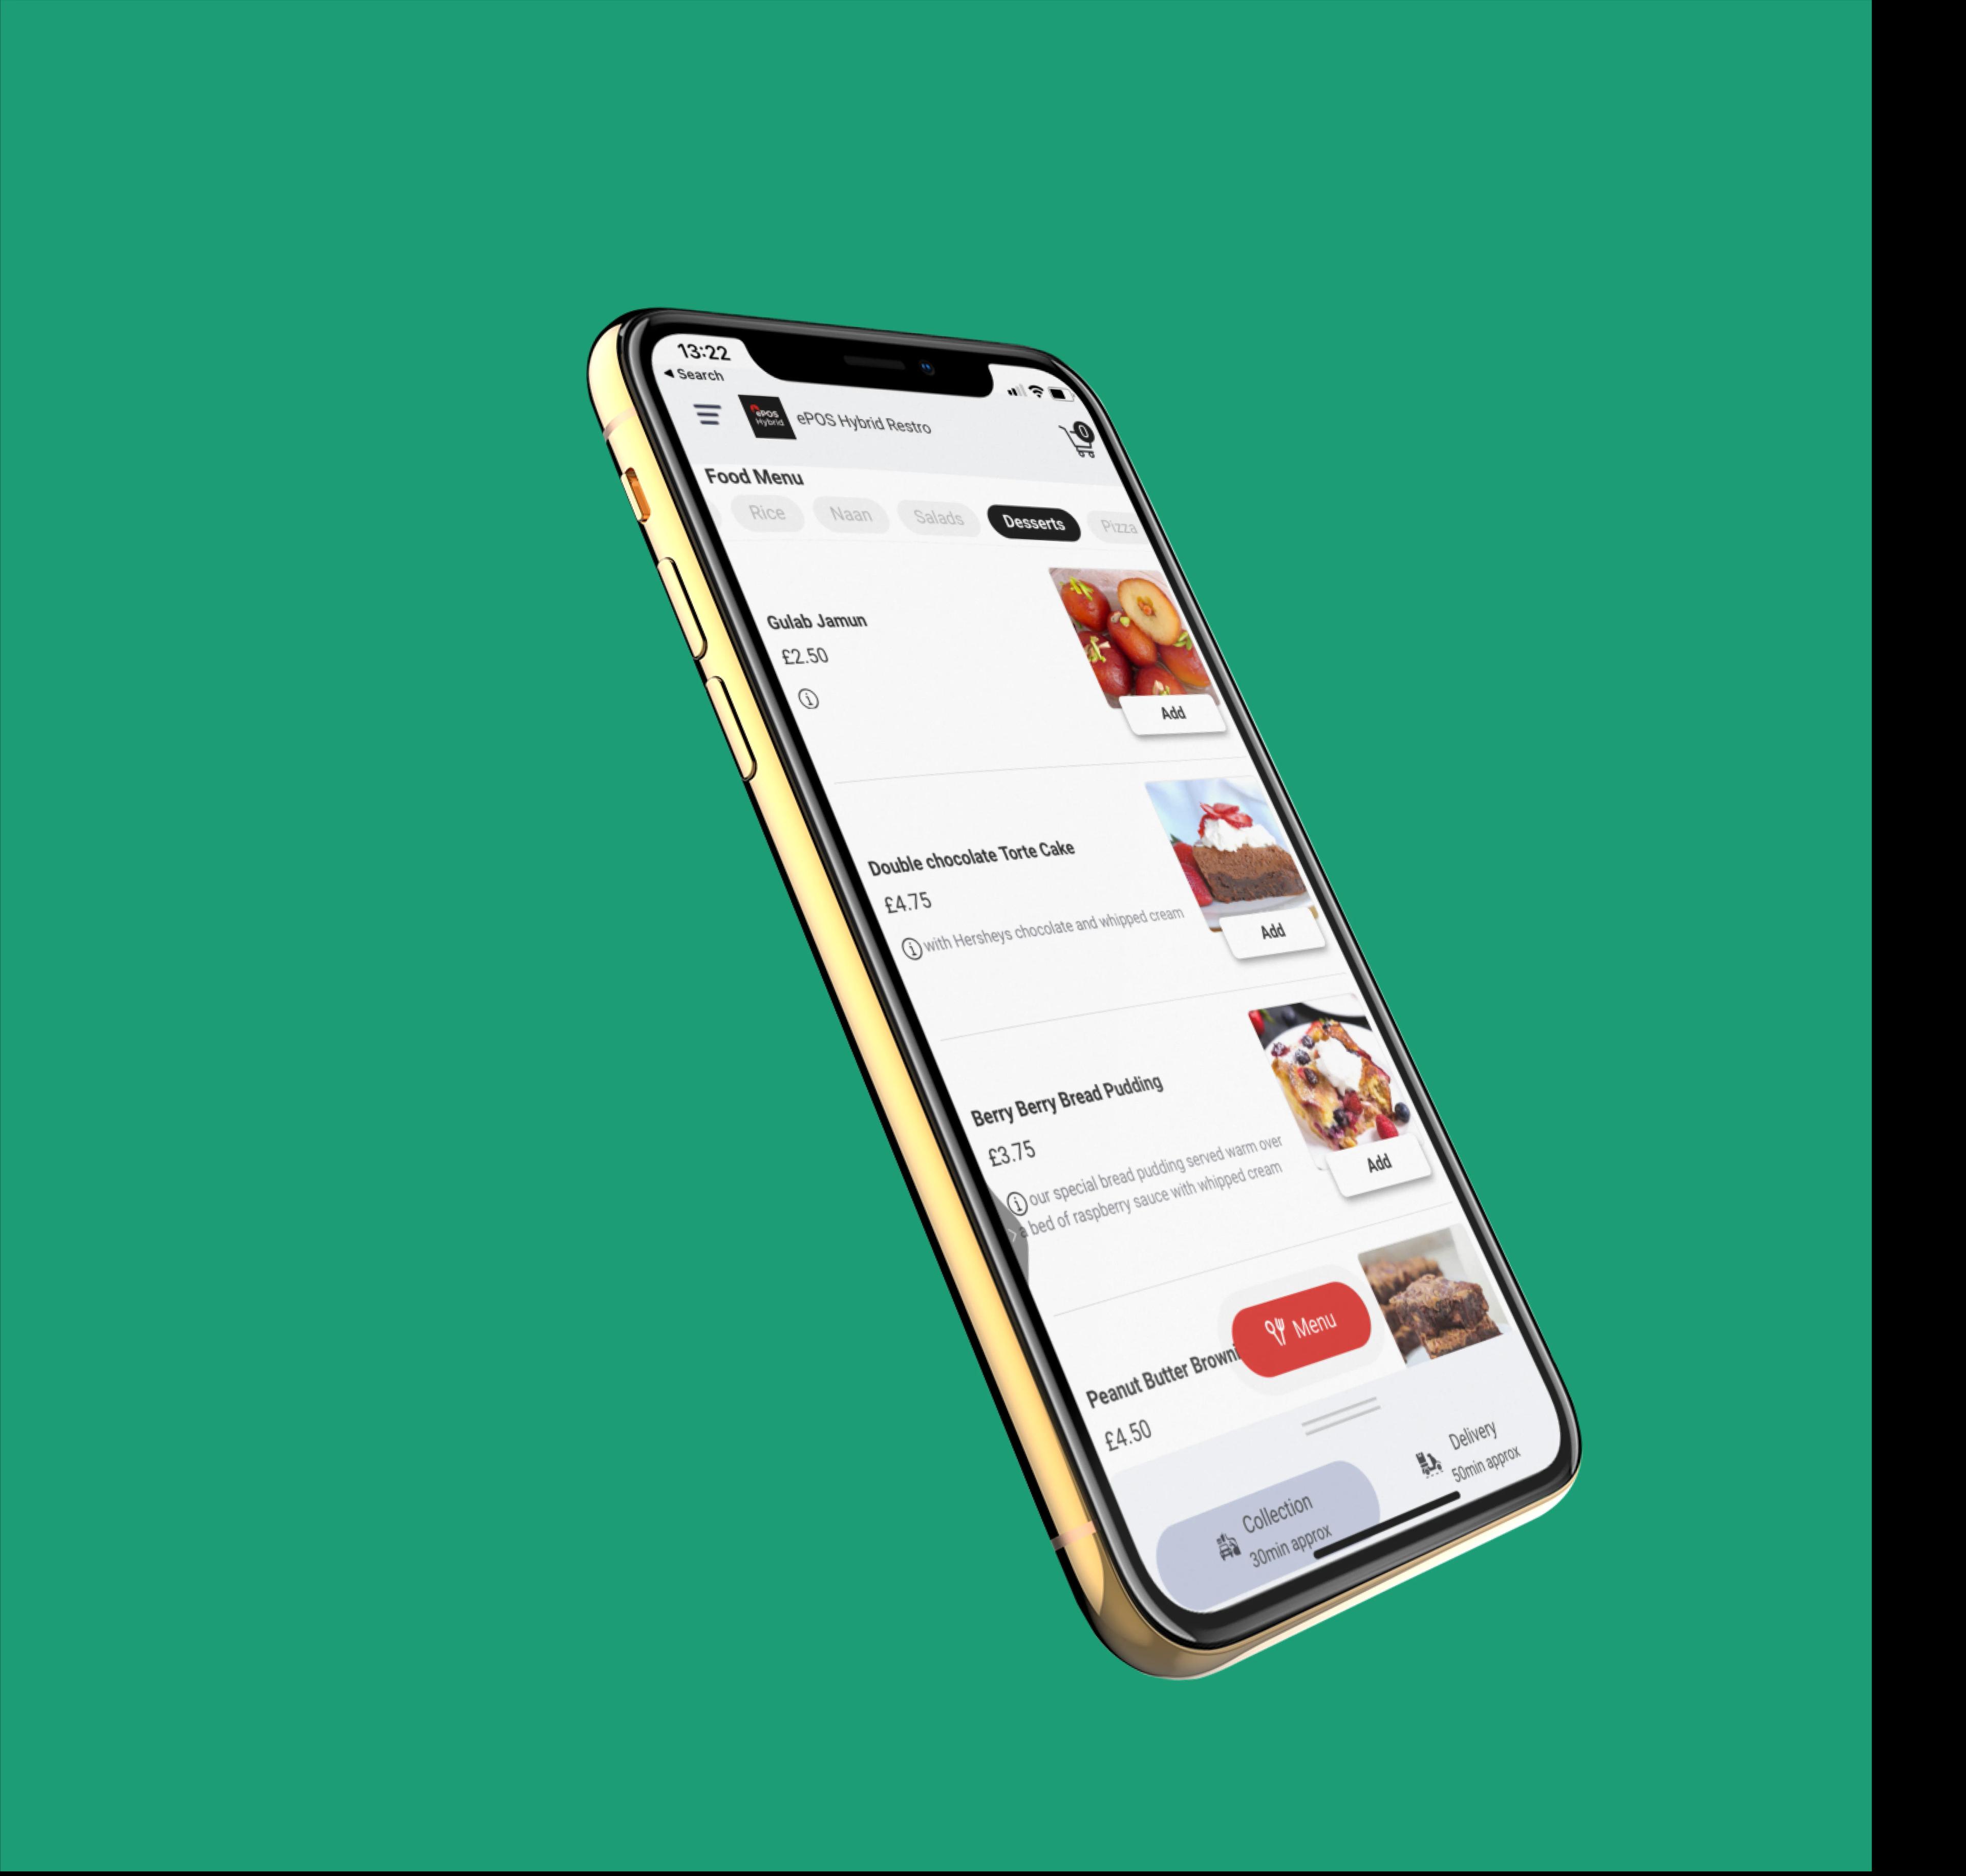 Mobile Ordering medium devices